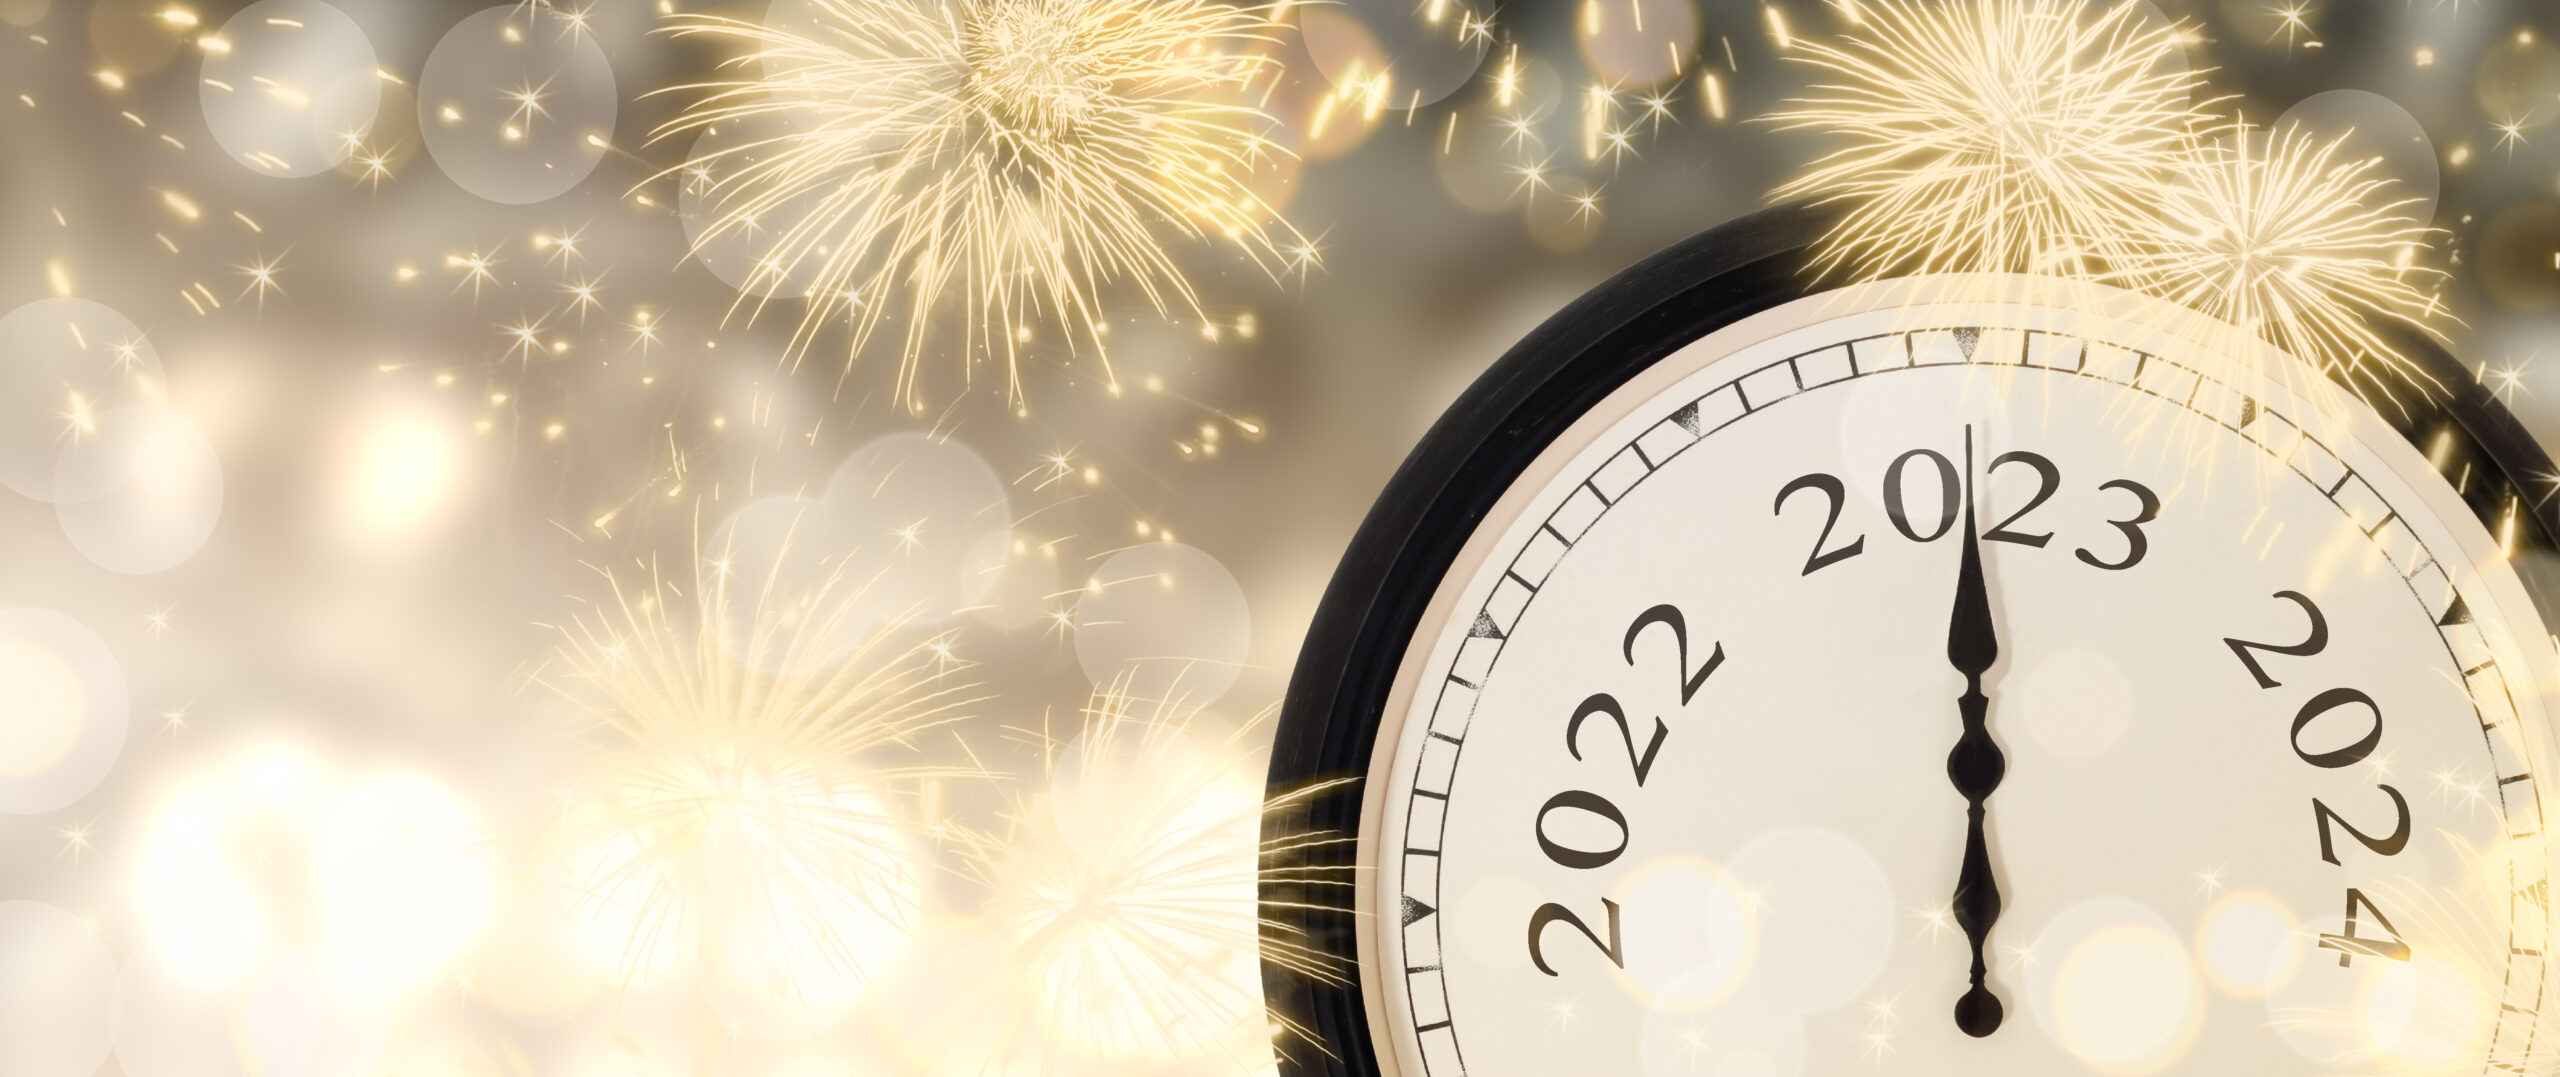 New Year`s Eve 2023 concept. Clock hands on year number 2023. Gold magic background with fireworks and blurred lights.